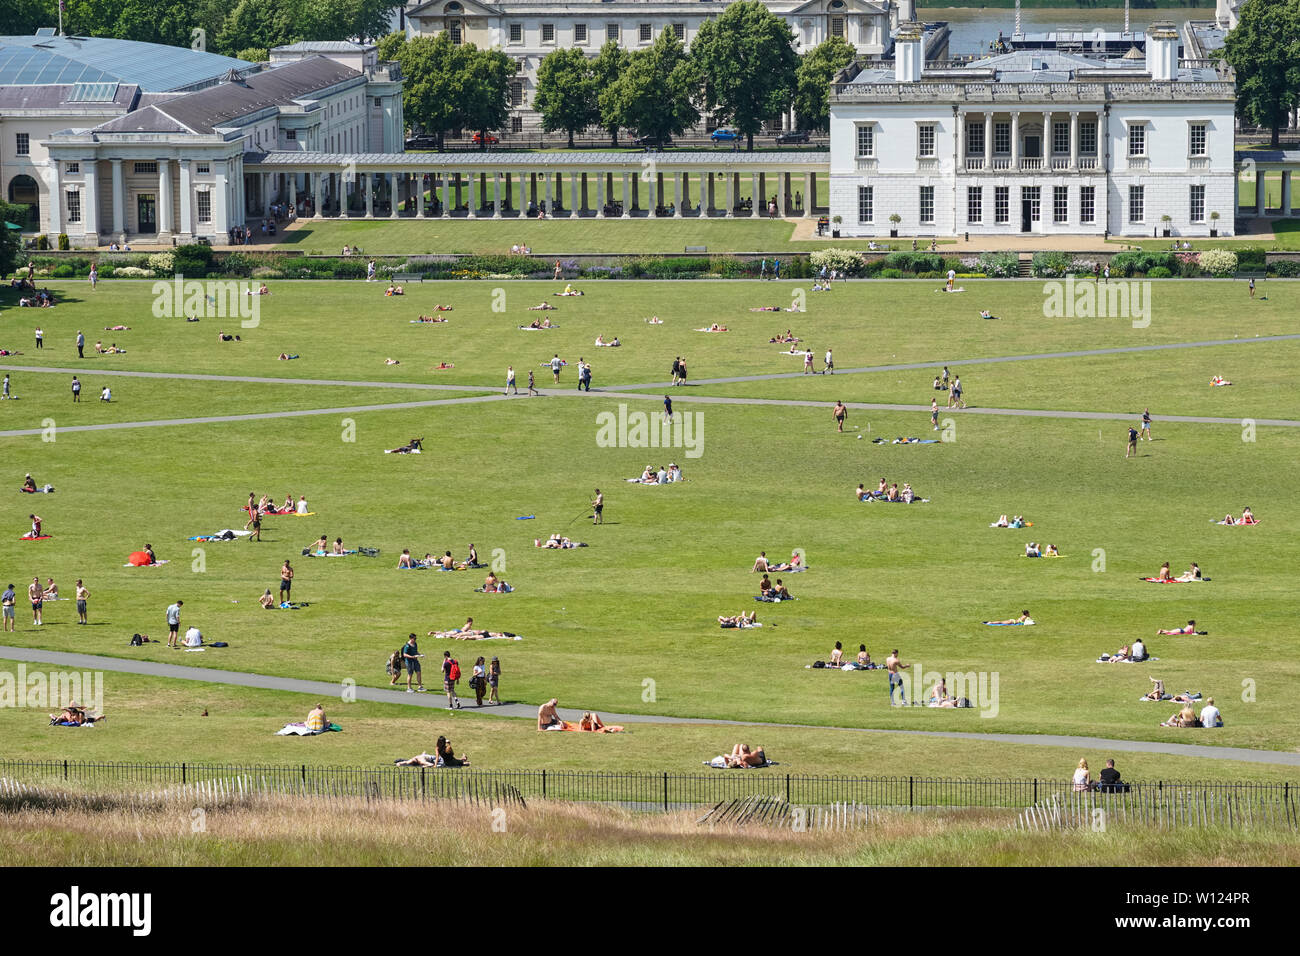 People enjoying hot and sunny day in Greenwich Park, London, England, United Kingdom, UK Stock Photo